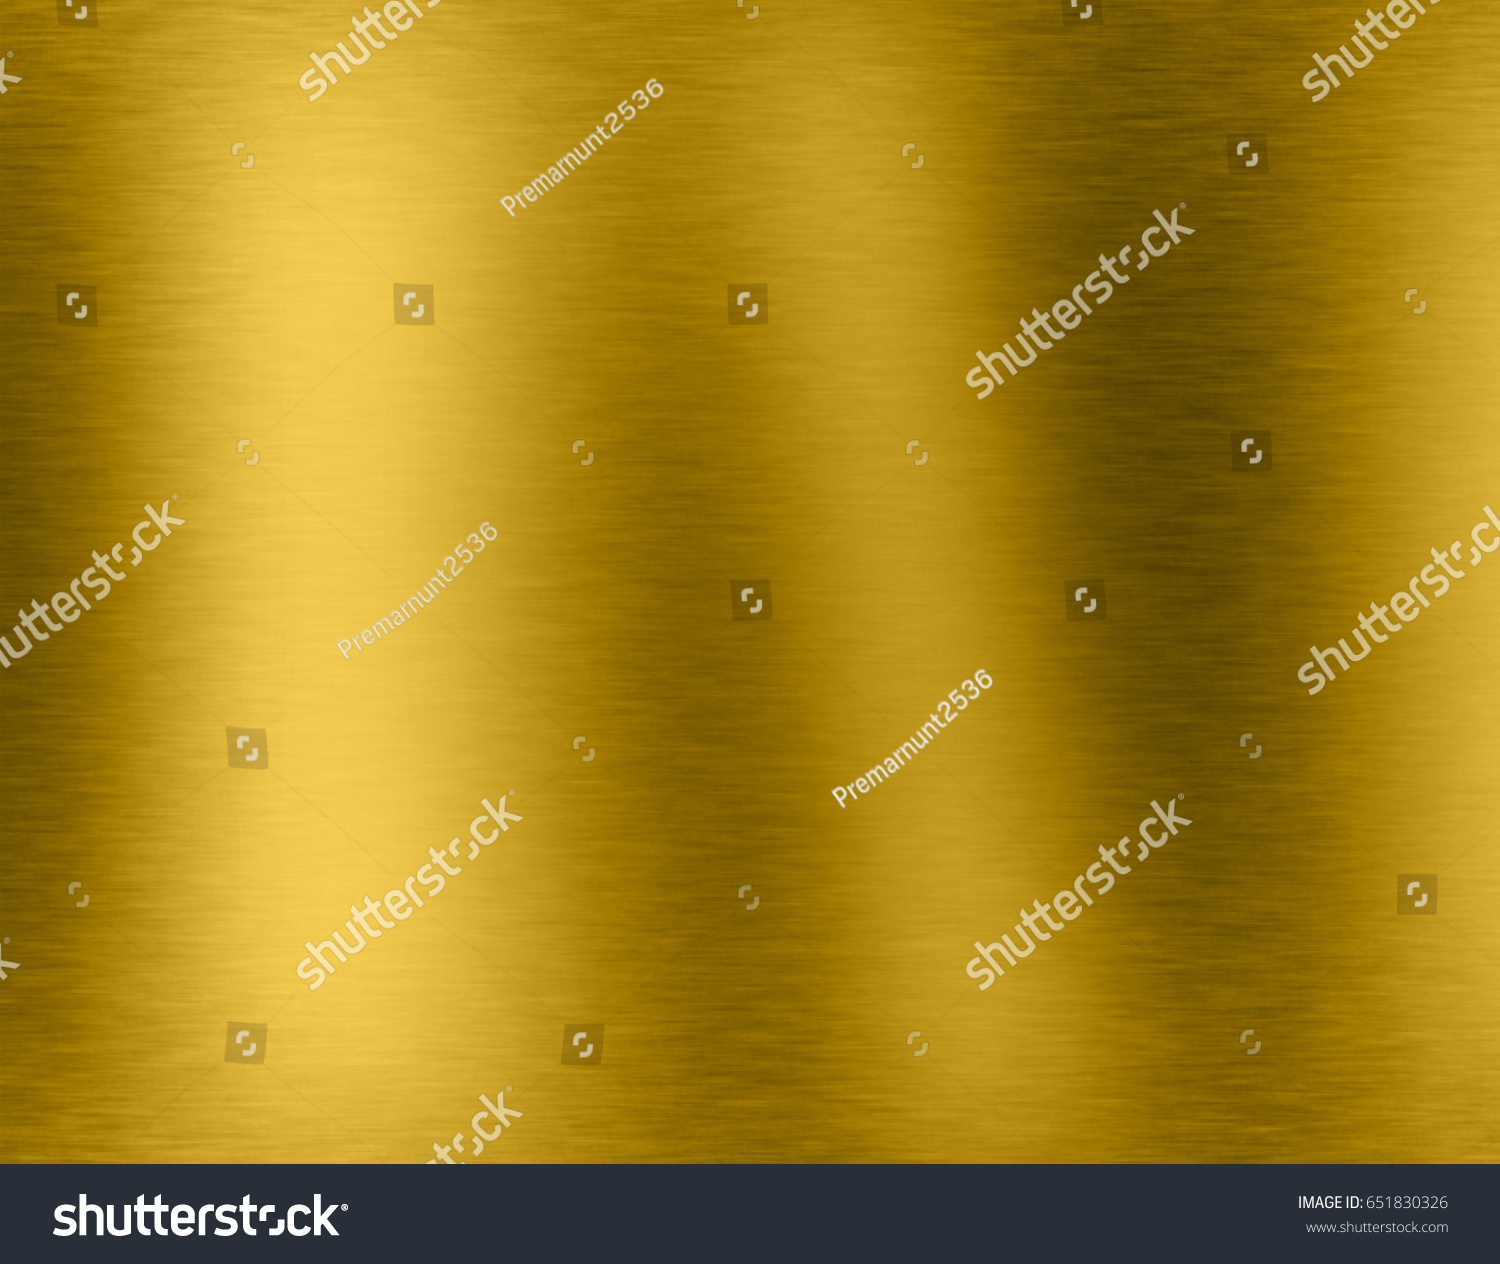 Gold metal brushed background or texture of brushed steel plate with reflections Iron plate and shiny #651830326